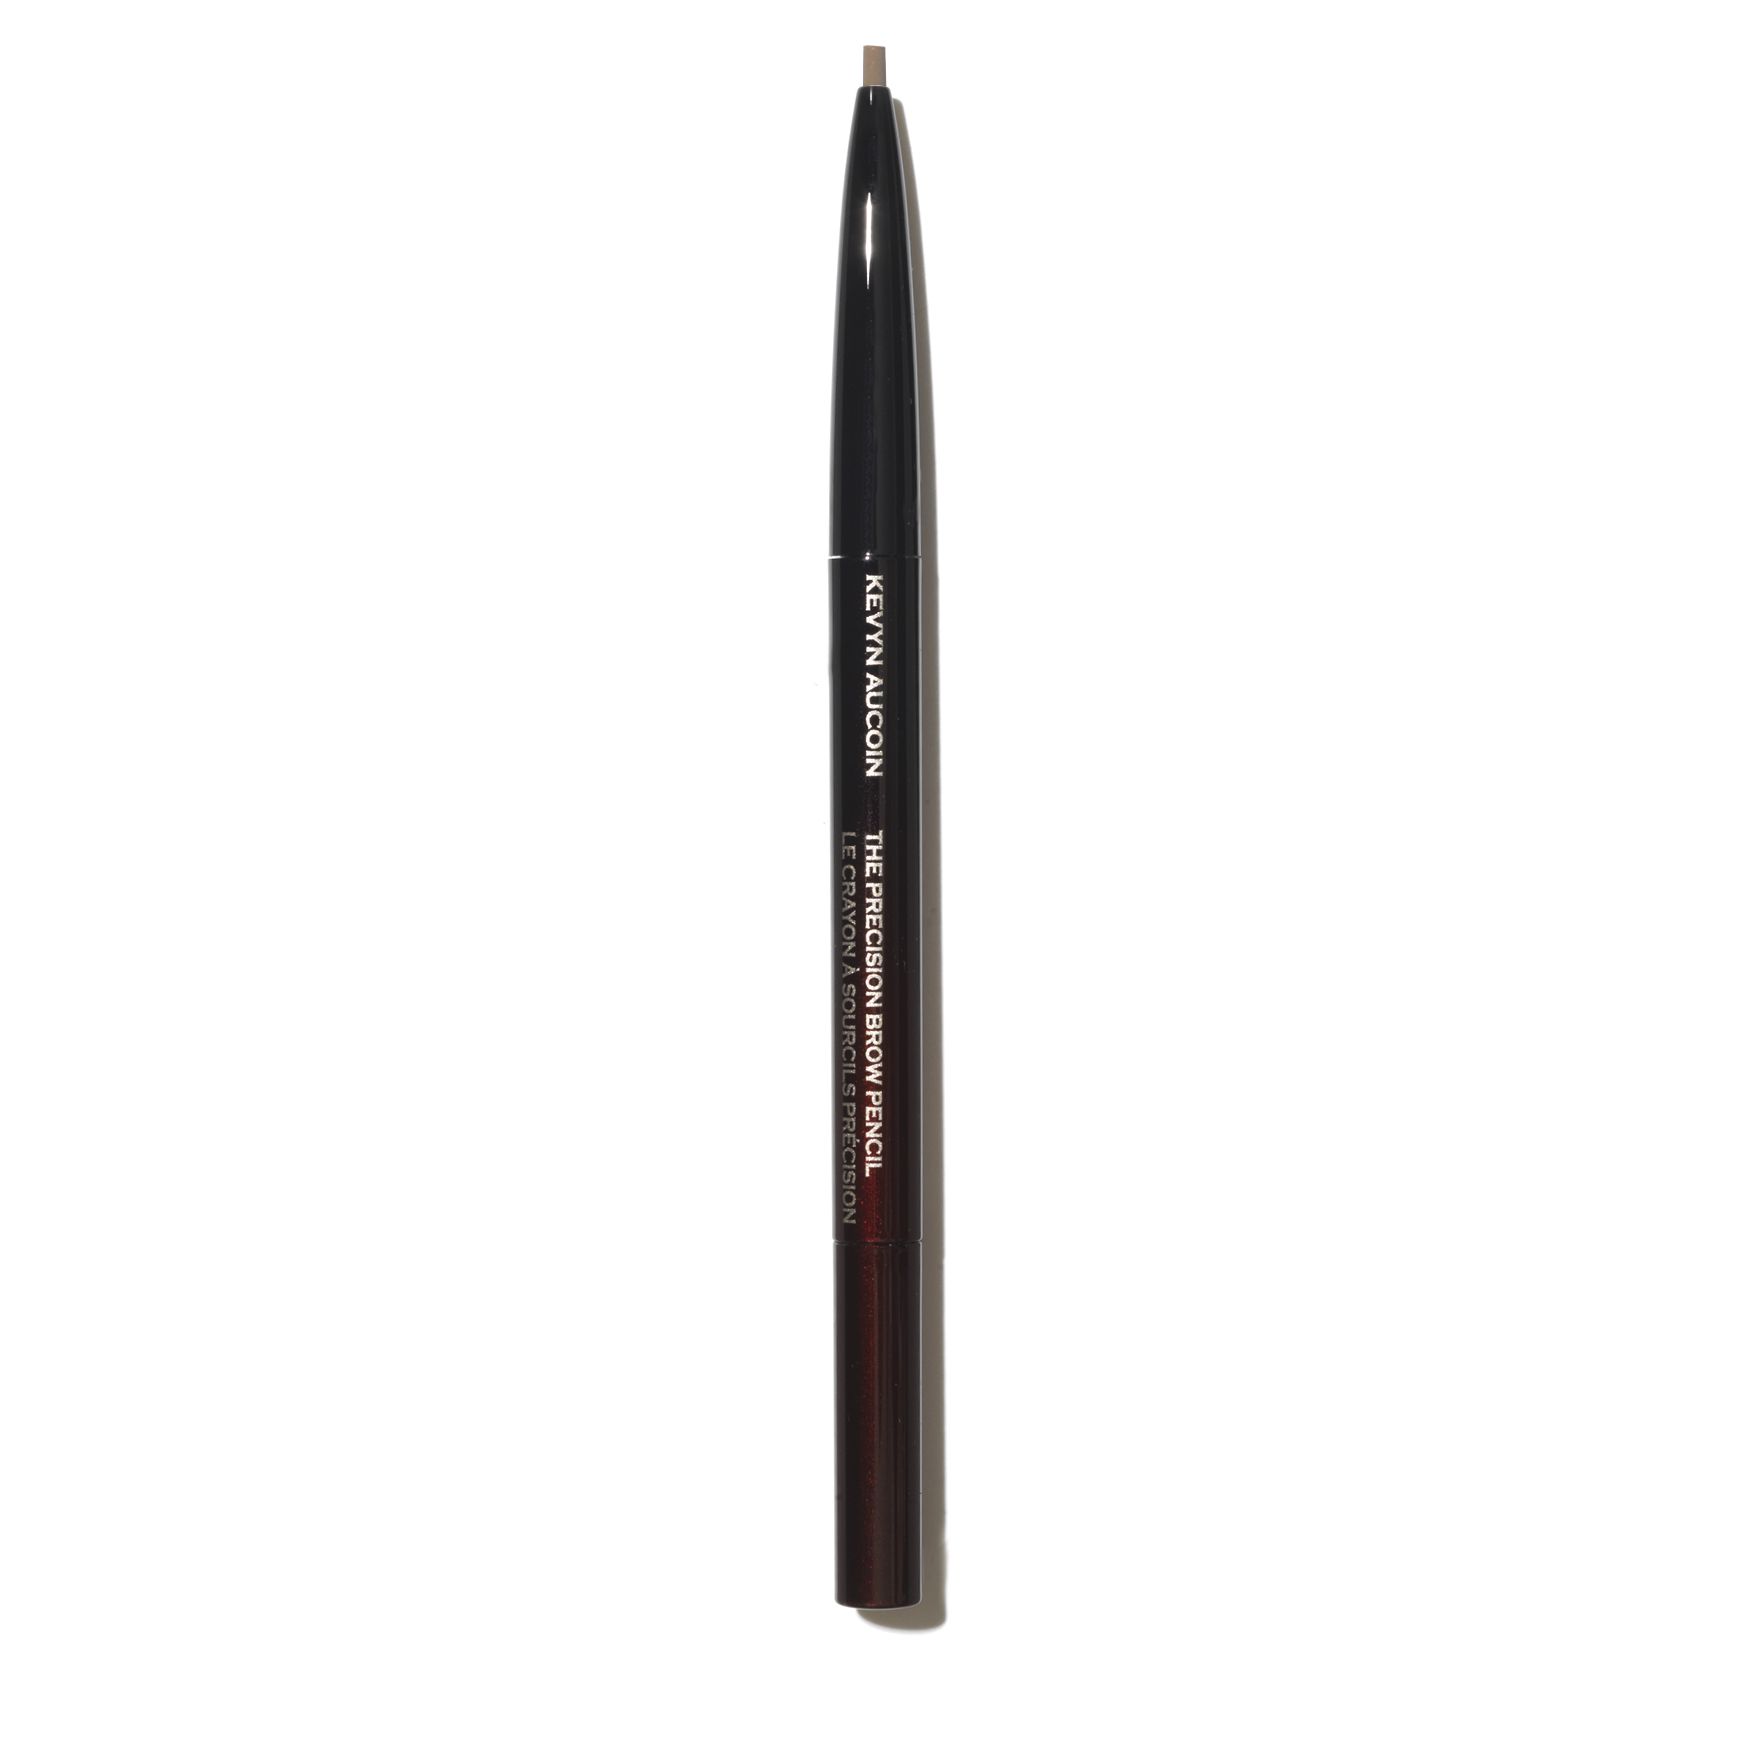 The Precision Brow Pencil | Space NK - UK